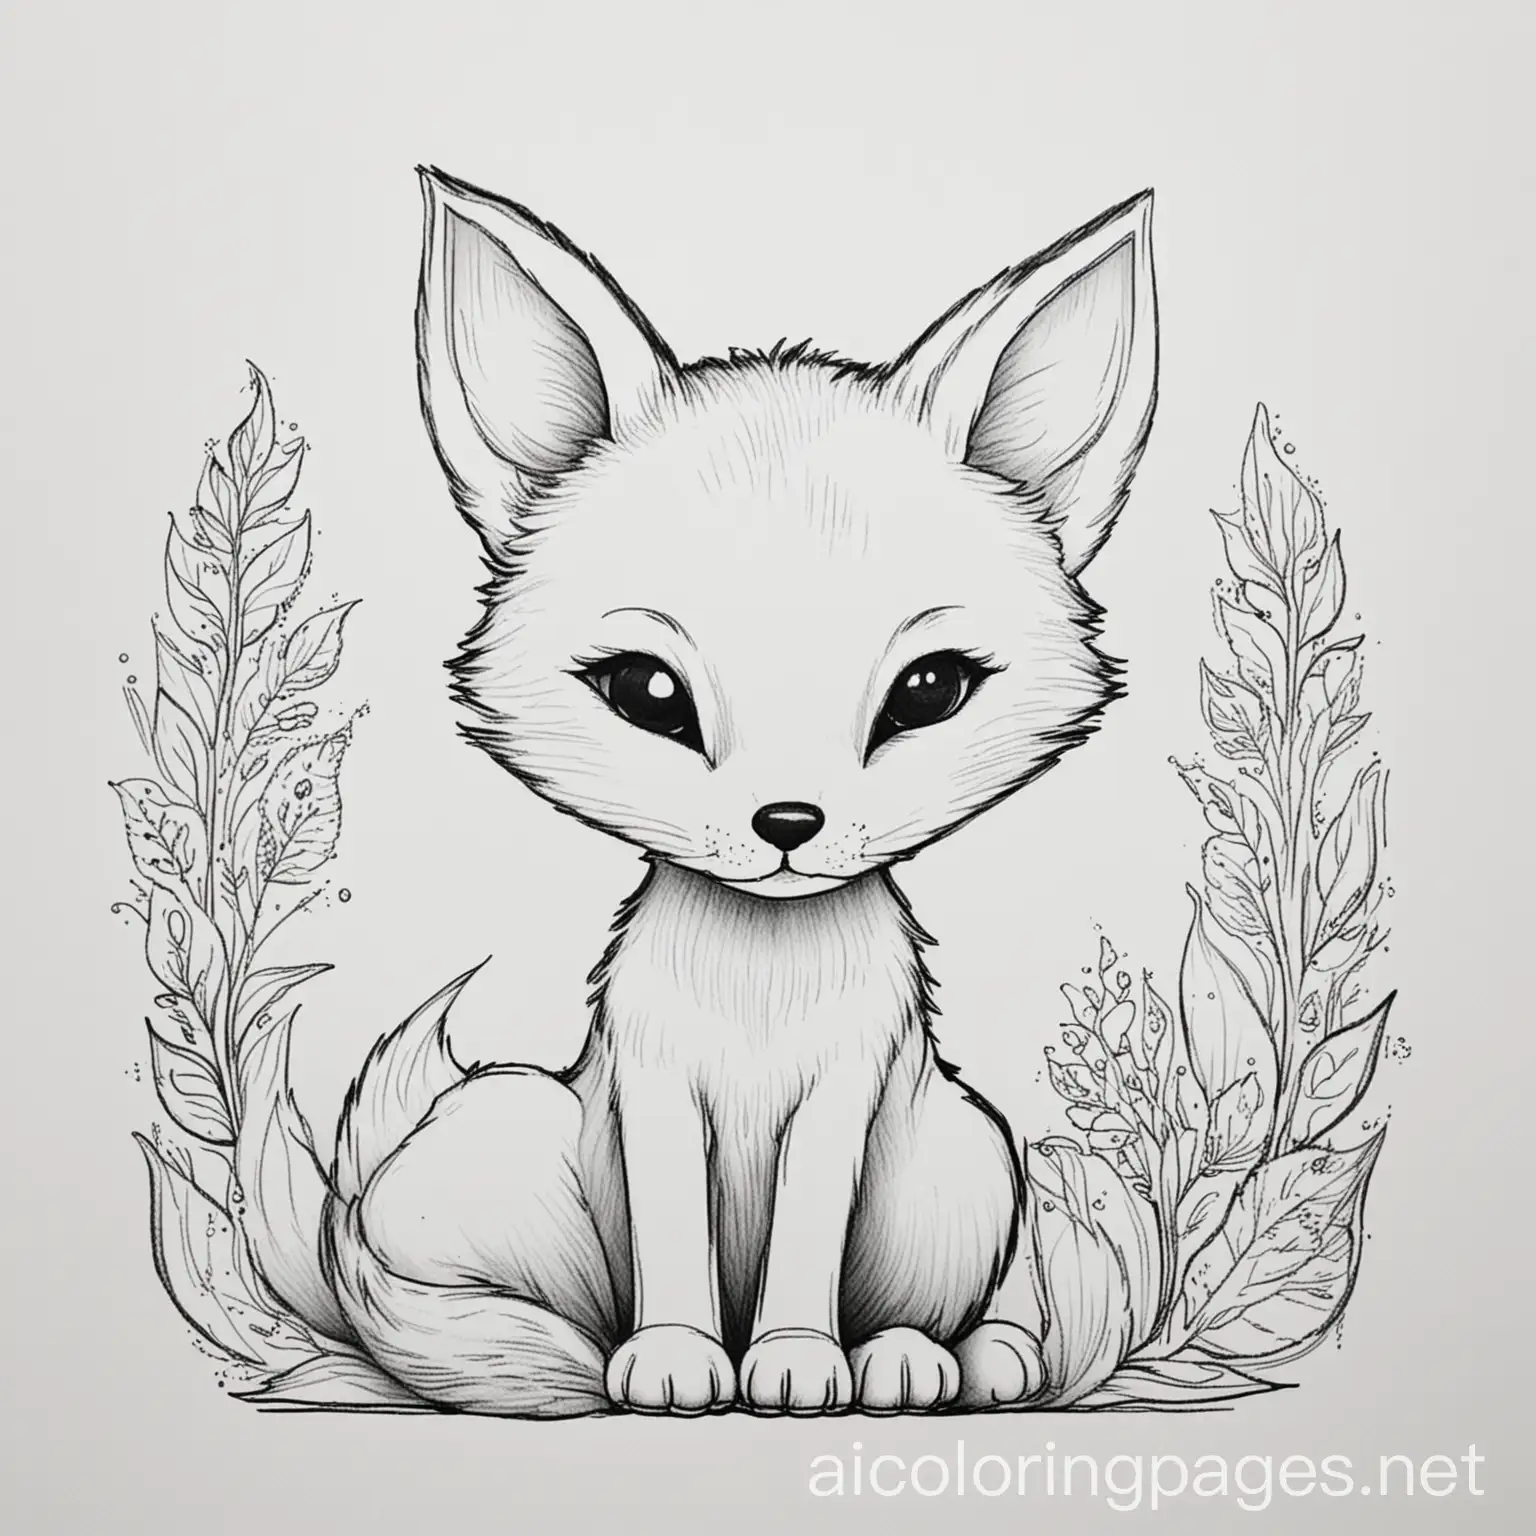 A LITLE FOX, Coloring Page, black and white, line art, white background, Simplicity, Ample White Space